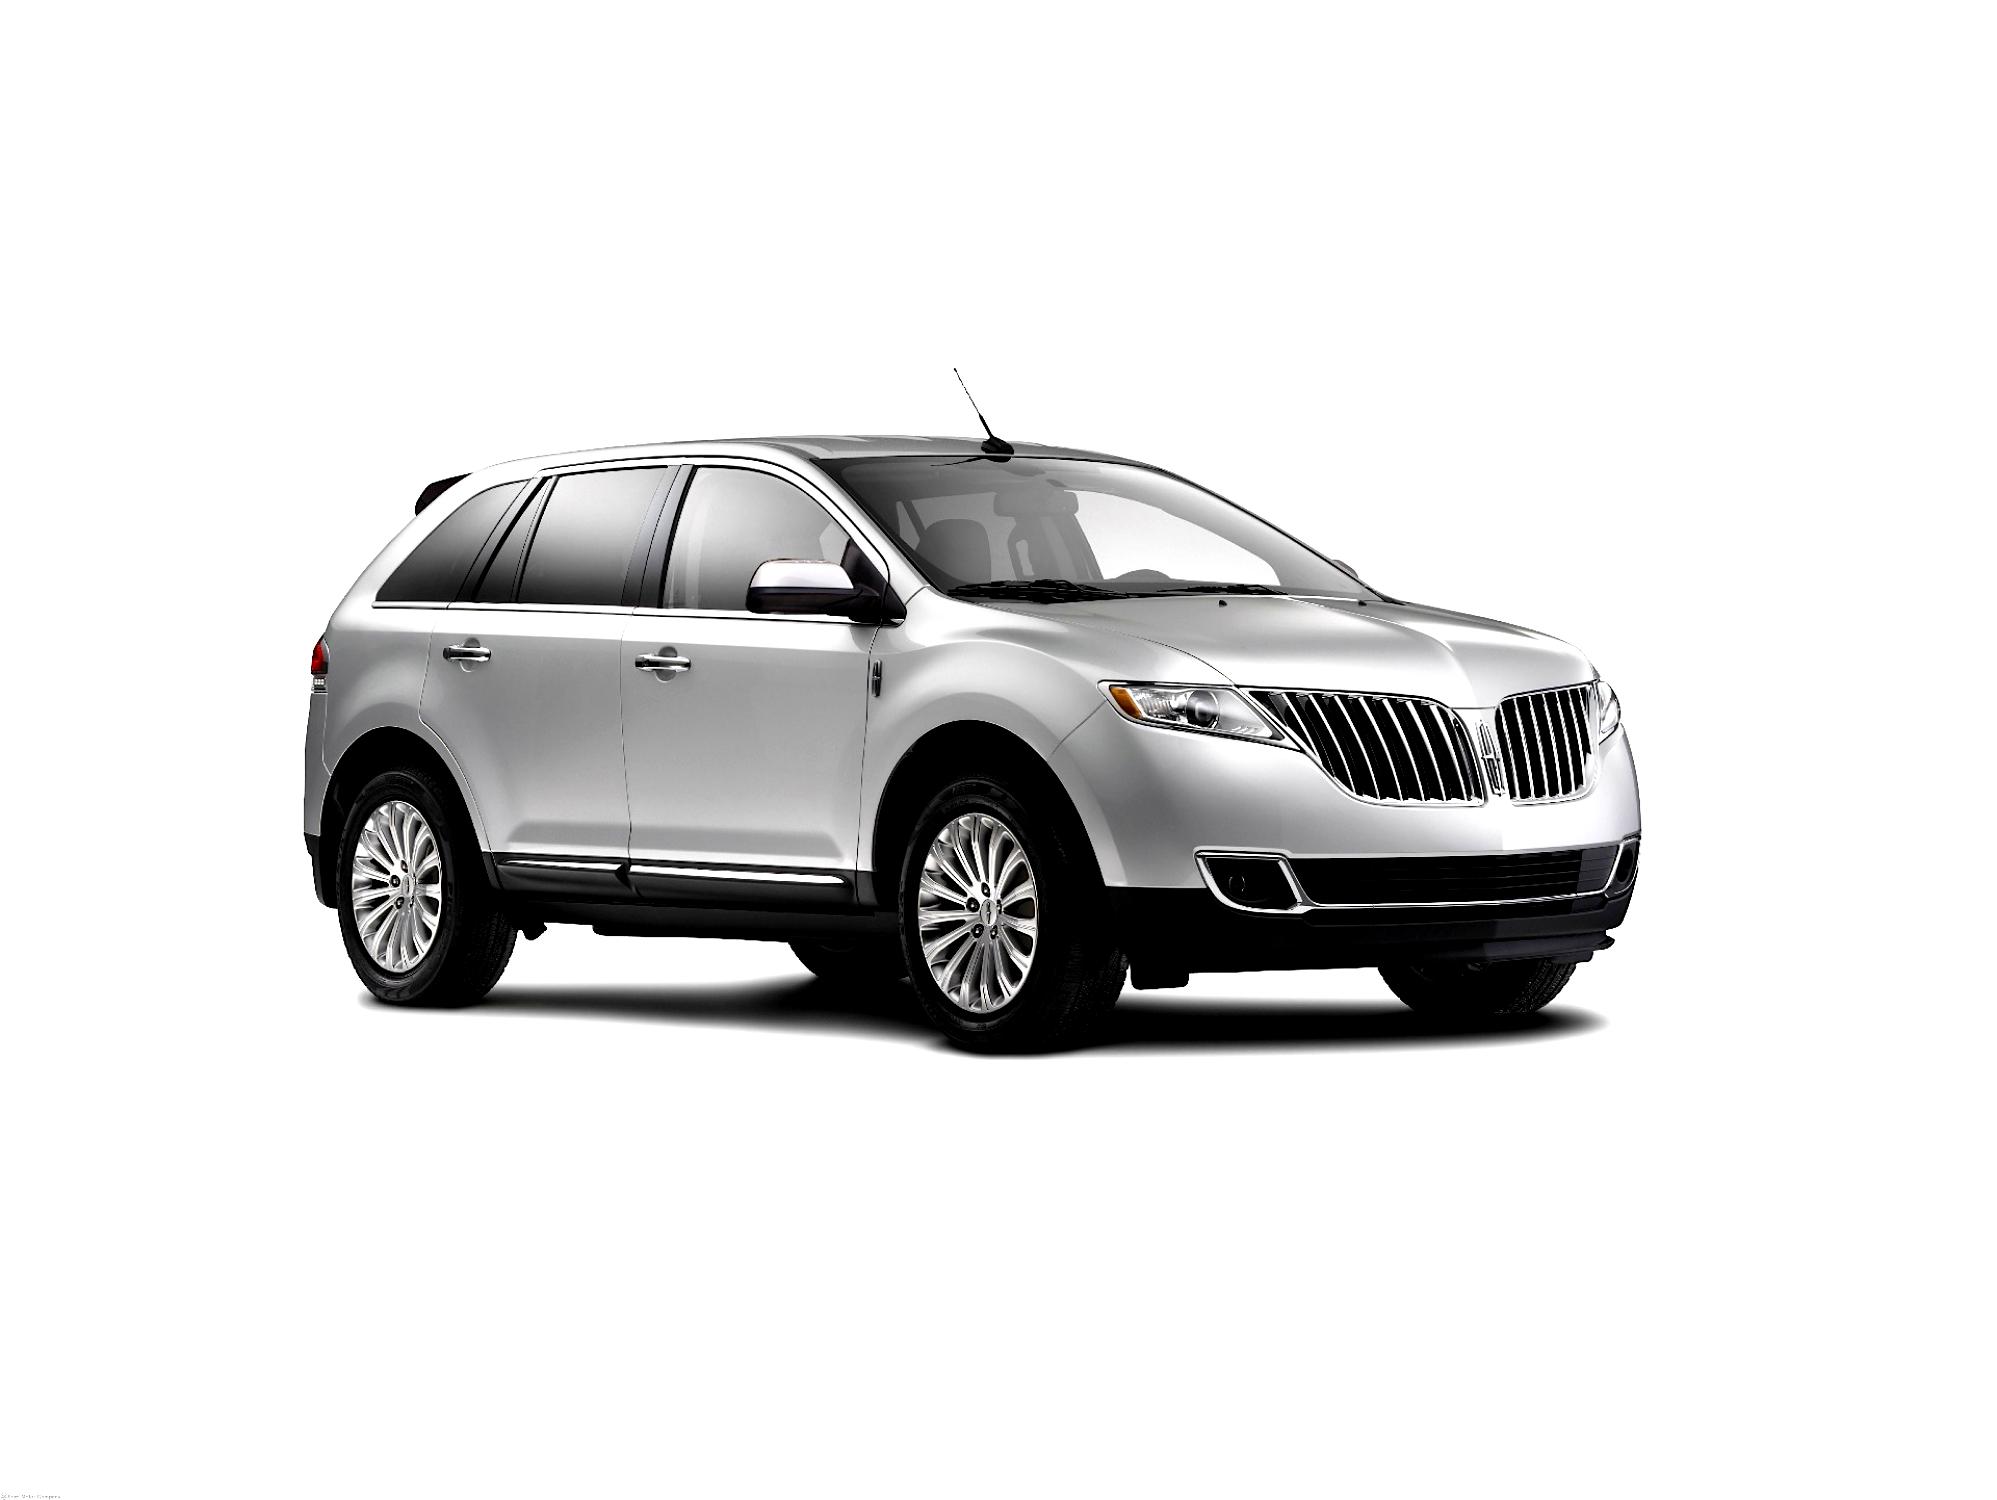 Lincoln MKX 2011 #52